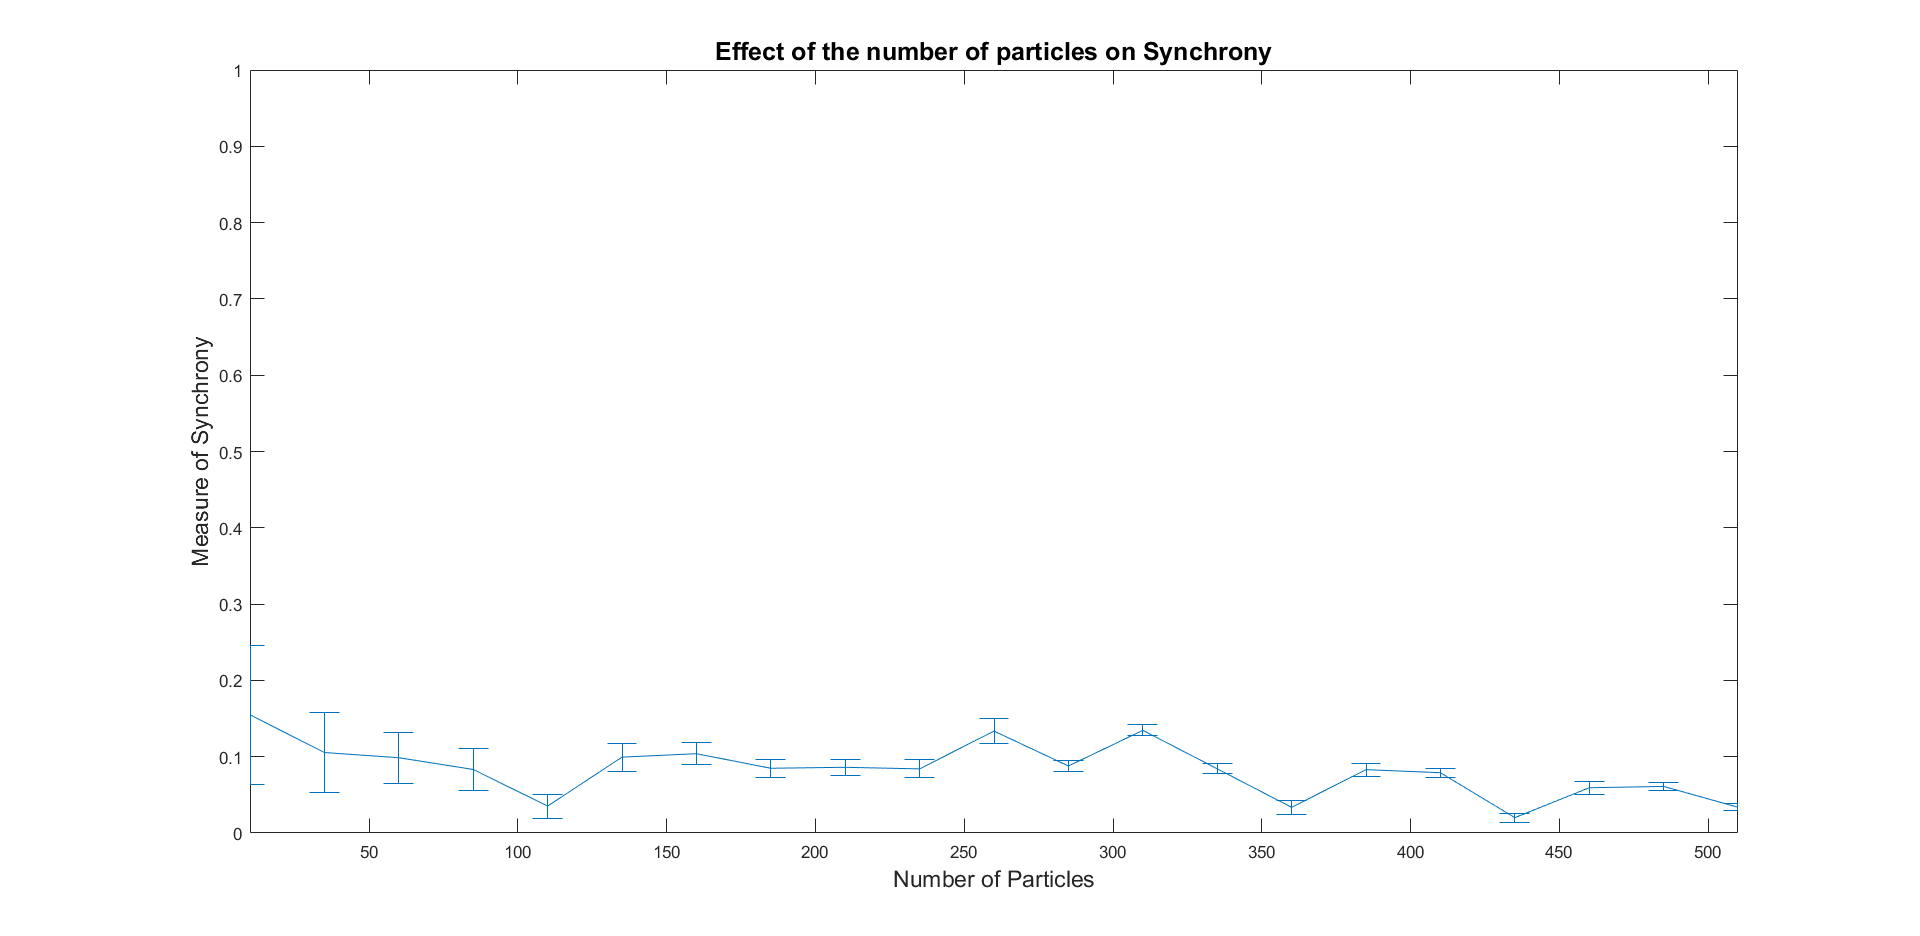 Graph of the angle of the effect of the number of particles on synchrony.